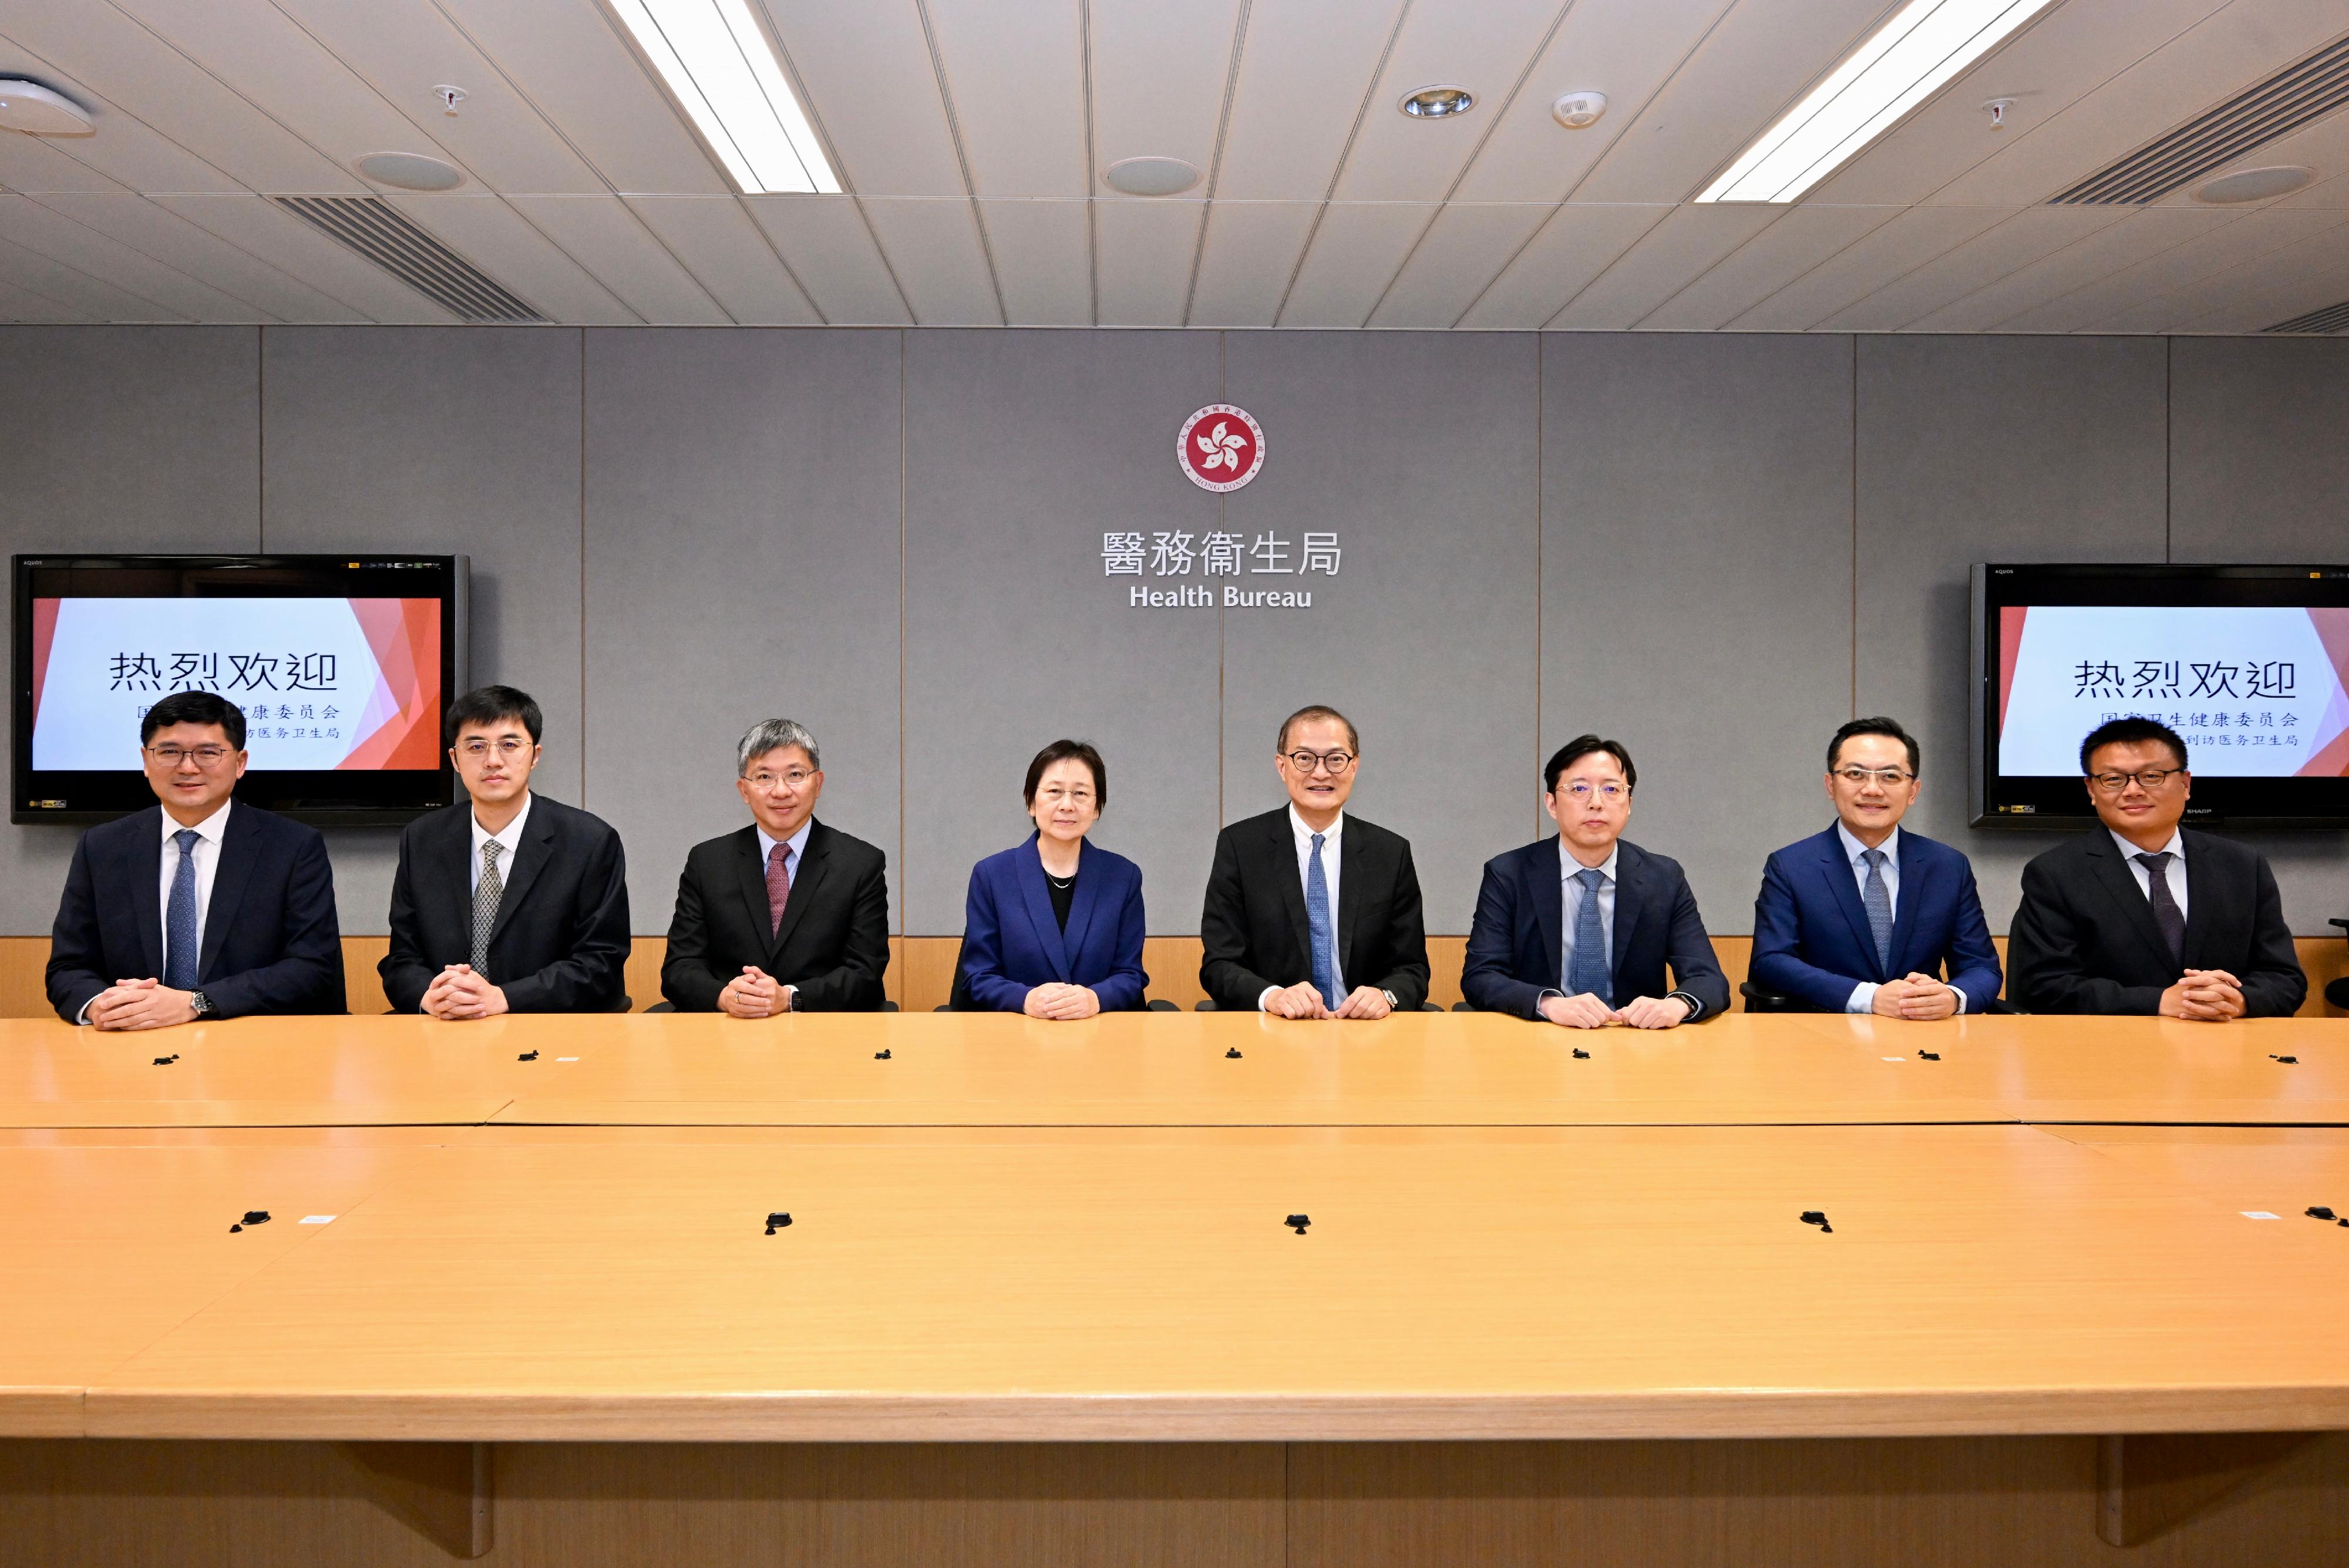 The Secretary for Health, Professor Lo Chung-mau, met with a delegation led by the Director General of the Office of Hong Kong, Macao and Taiwan Affairs of the National Health Commission, Ms Zhang Yang, today (September 12). Photo shows Professor Lo (fourth right); Ms Zhang (fourth left); the Permanent Secretary for Health, Mr Thomas Chan (third left); the Director of Health, Dr Ronald Lam (second right); the Chief Executive of the Hospital Authority, Dr Tony Ko (first left), and other attendees of the meeting.